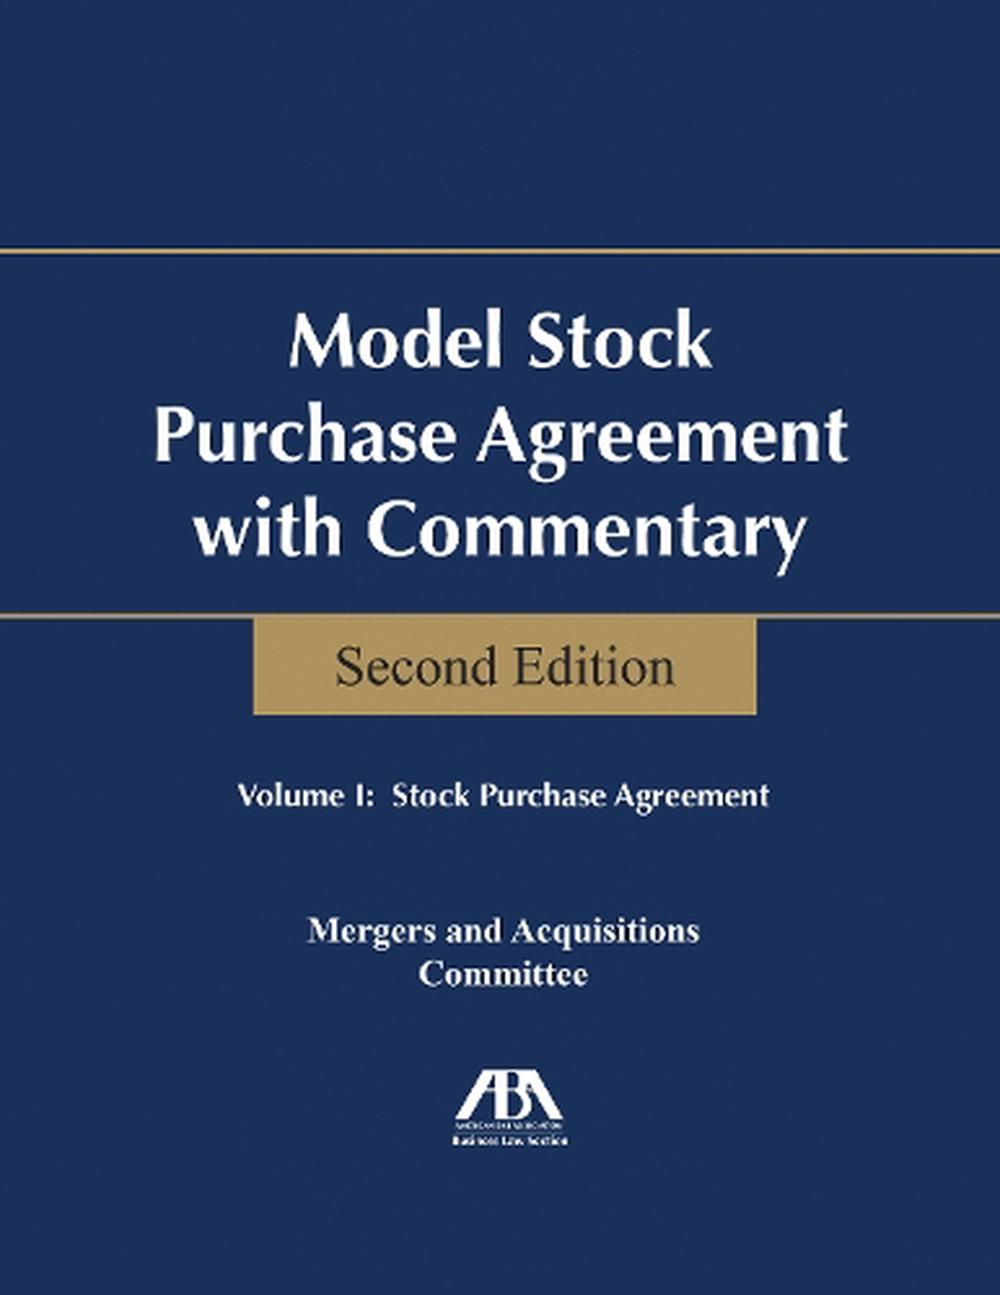 Model Stock Purchase Agreement with Commentary by Aba Business Law